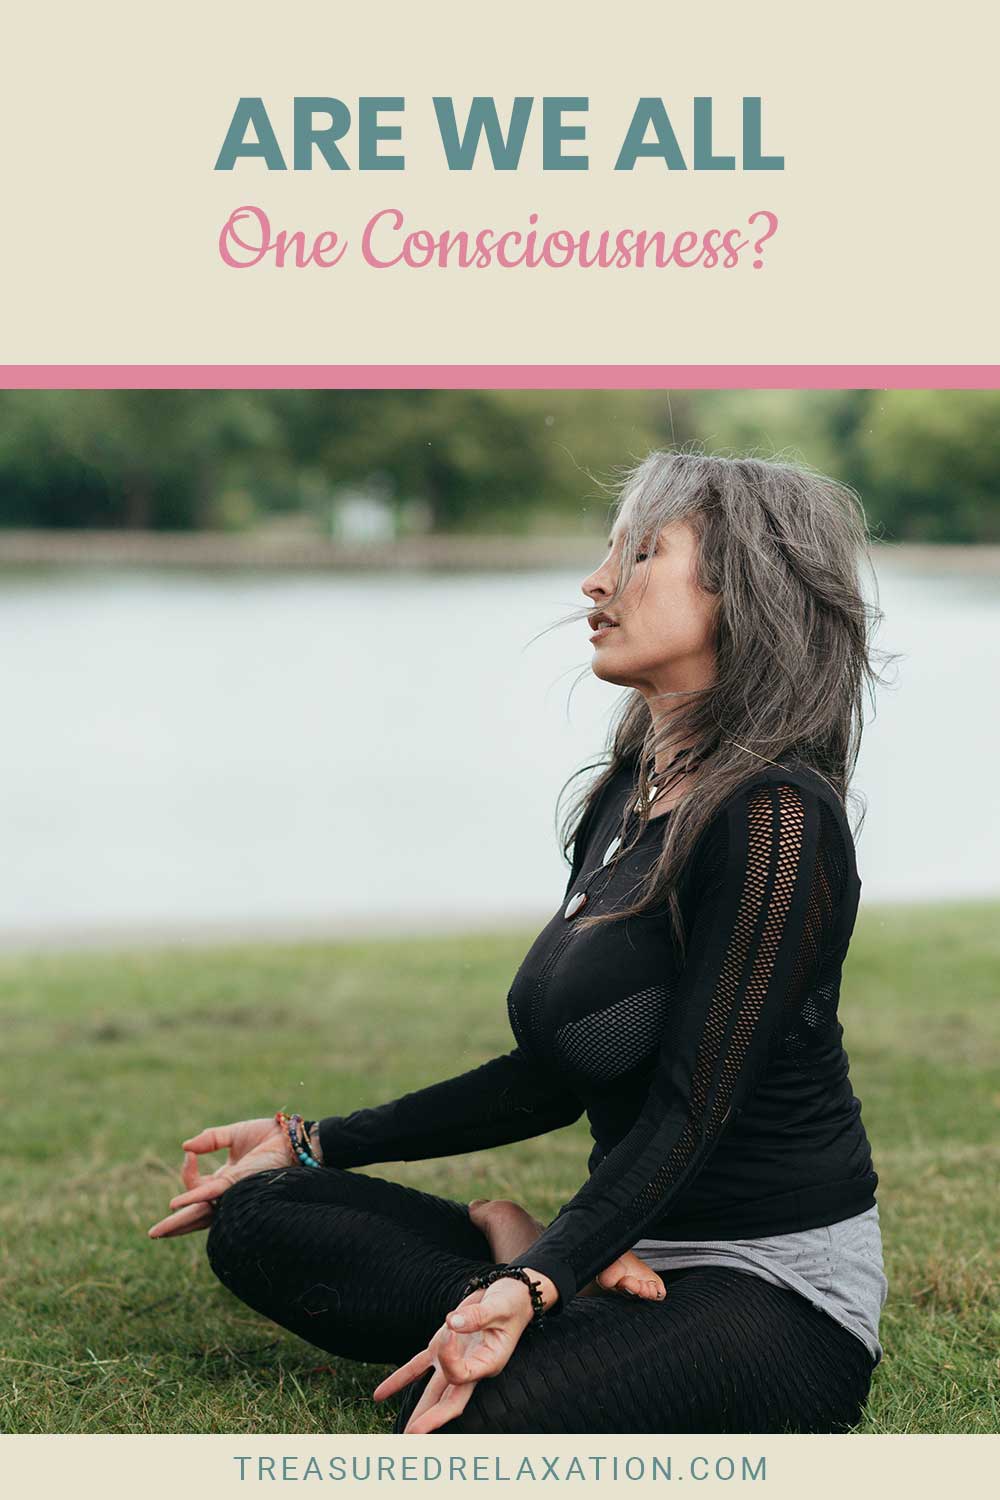 Woman in black top doing yoga near a lake - Are We All One Consciousness?